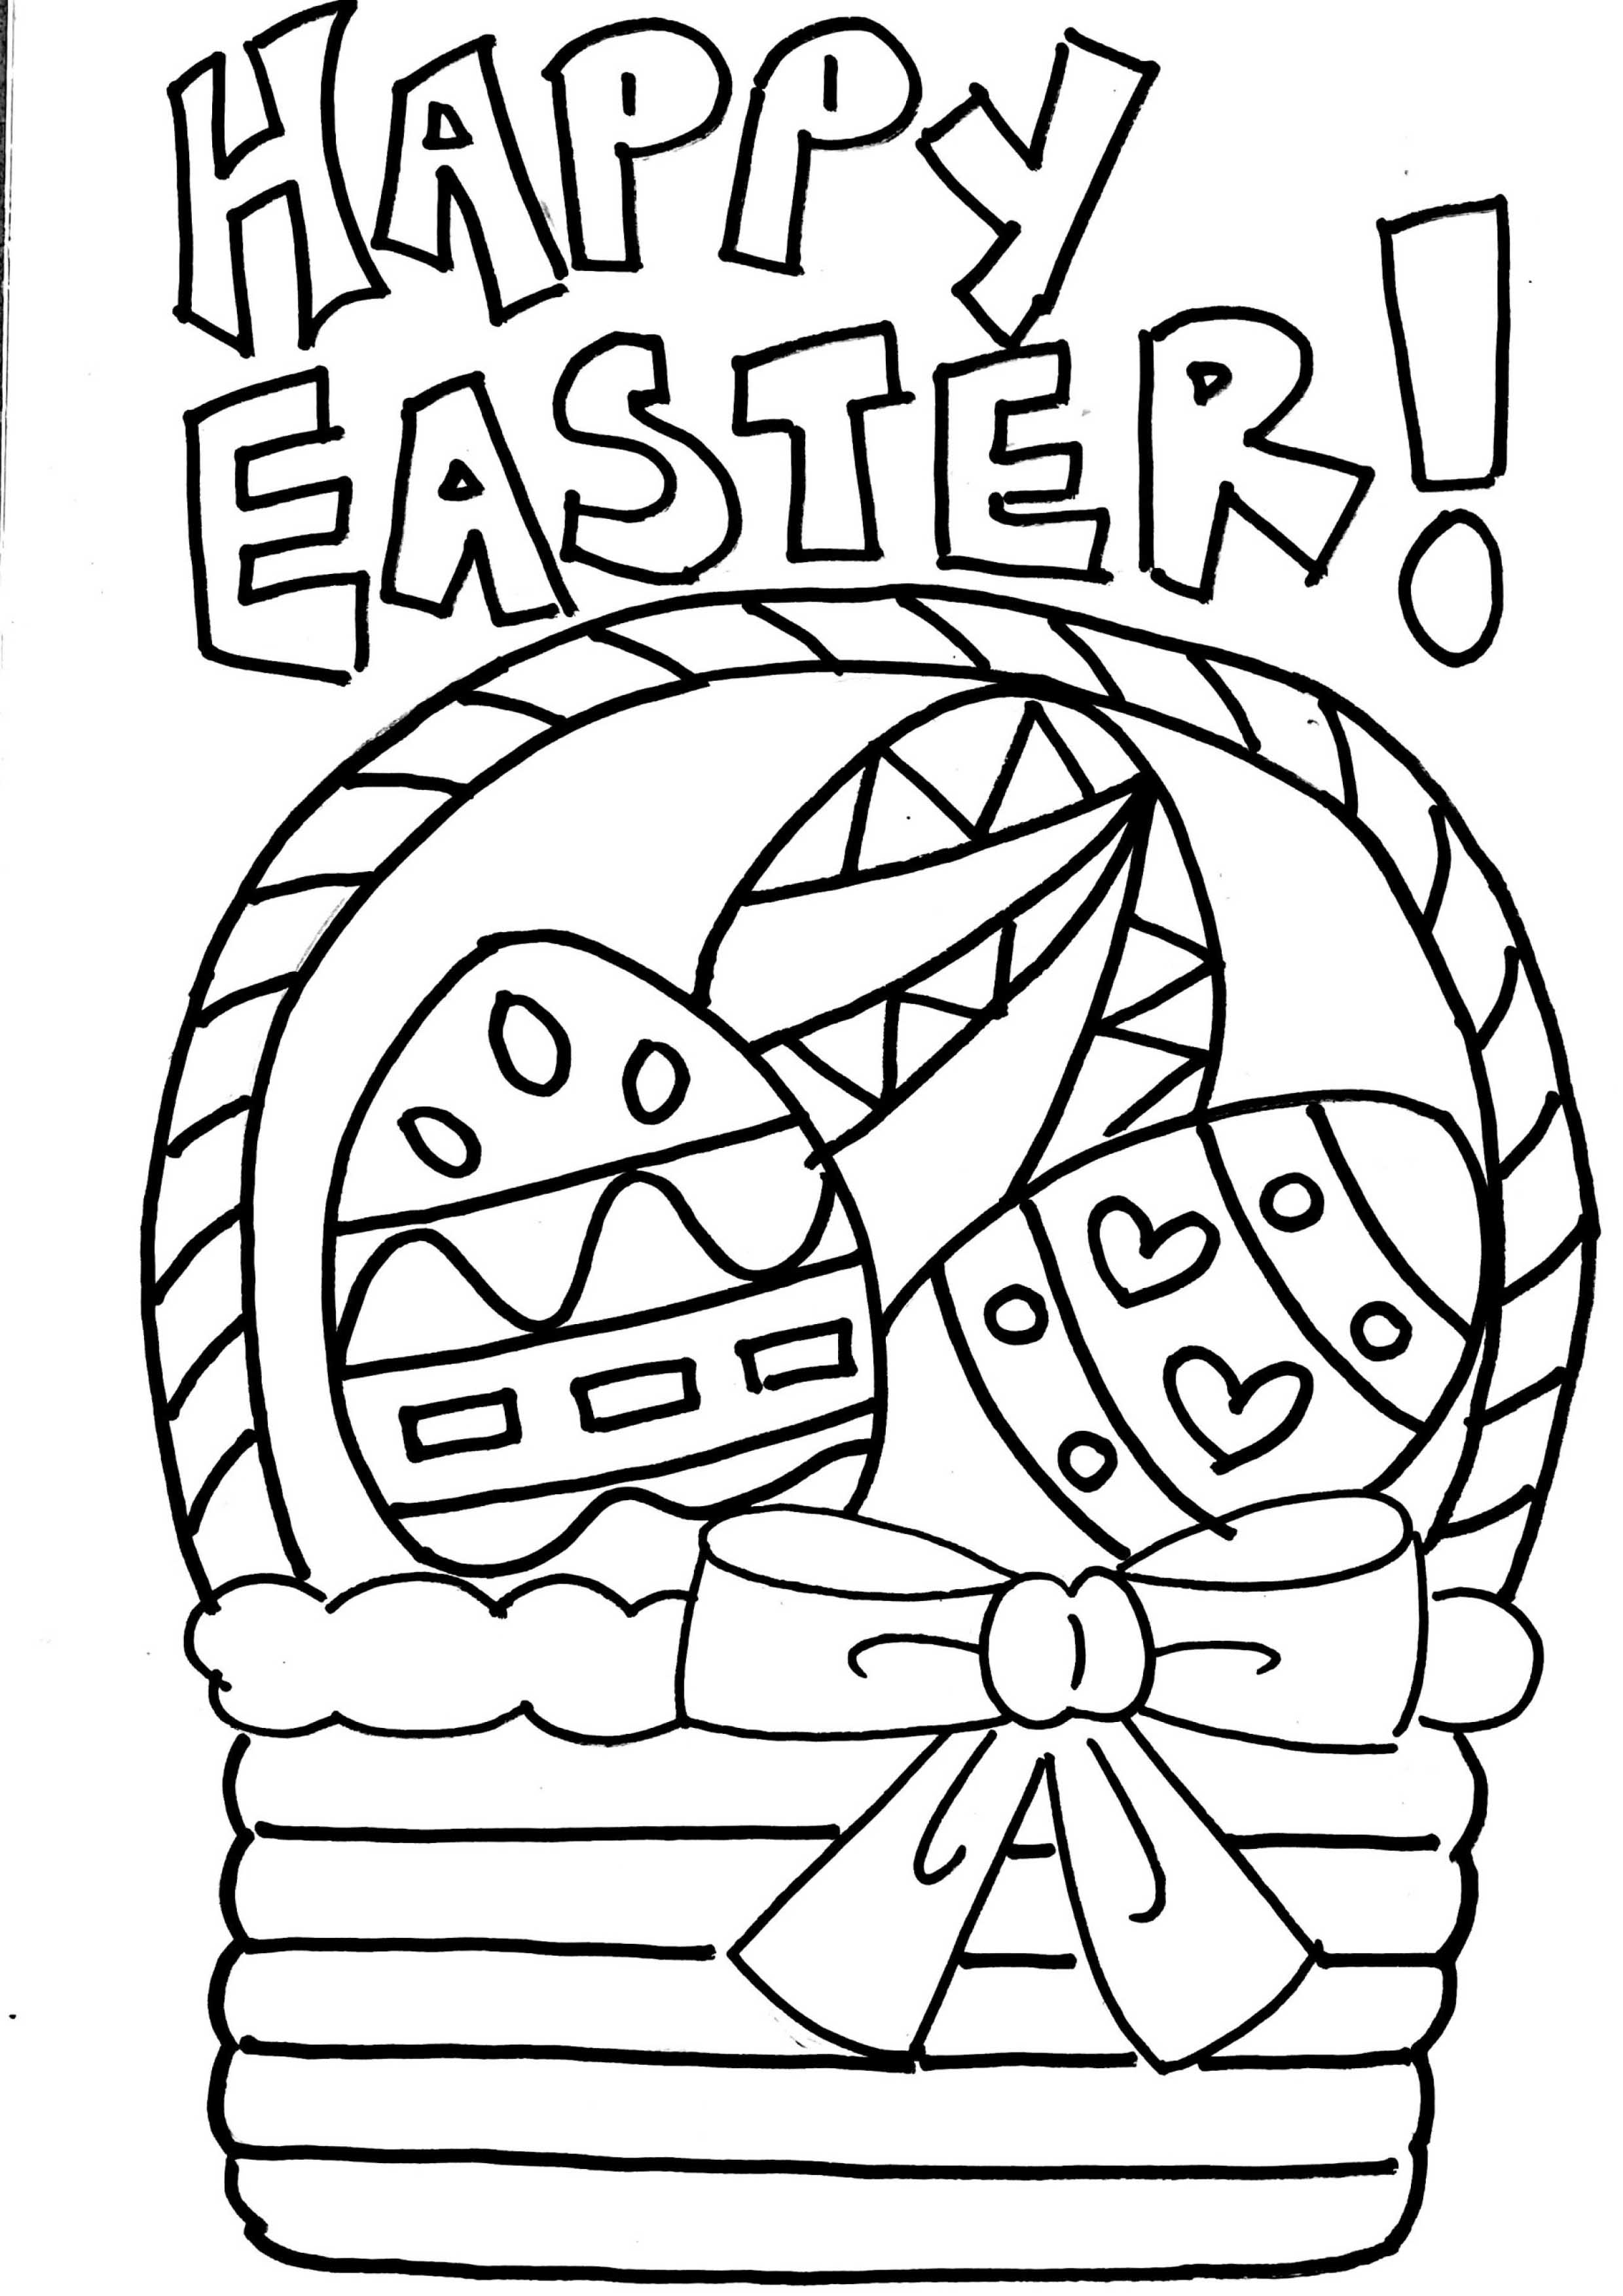 5-free-easter-coloring-pages-for-kids